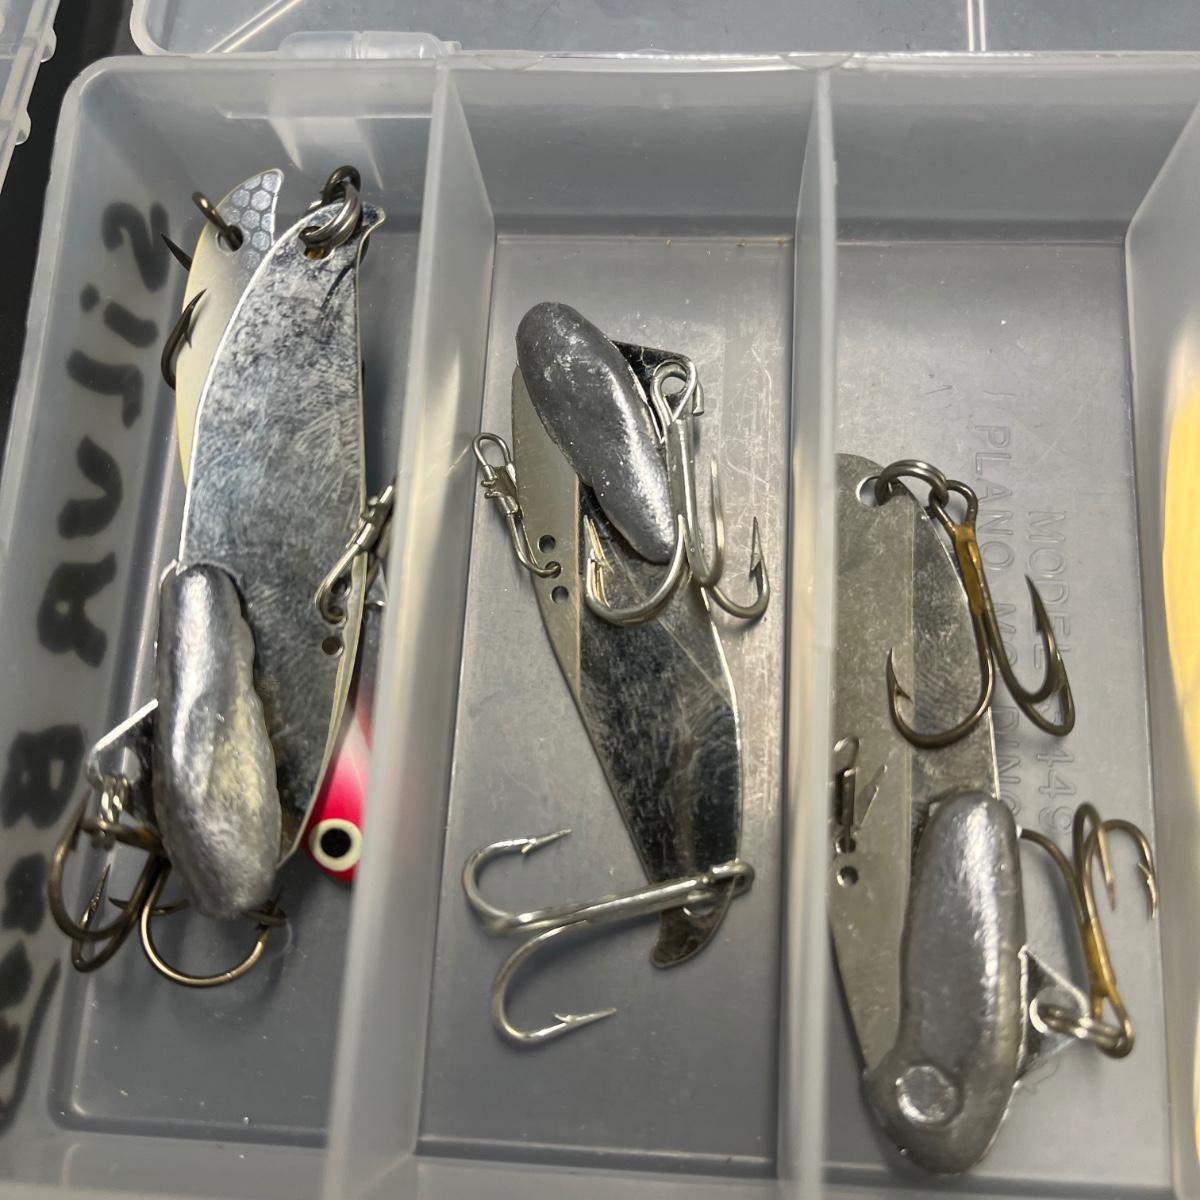 LOT 165B: Fishing Lures - Crankbaits, Spoons and More